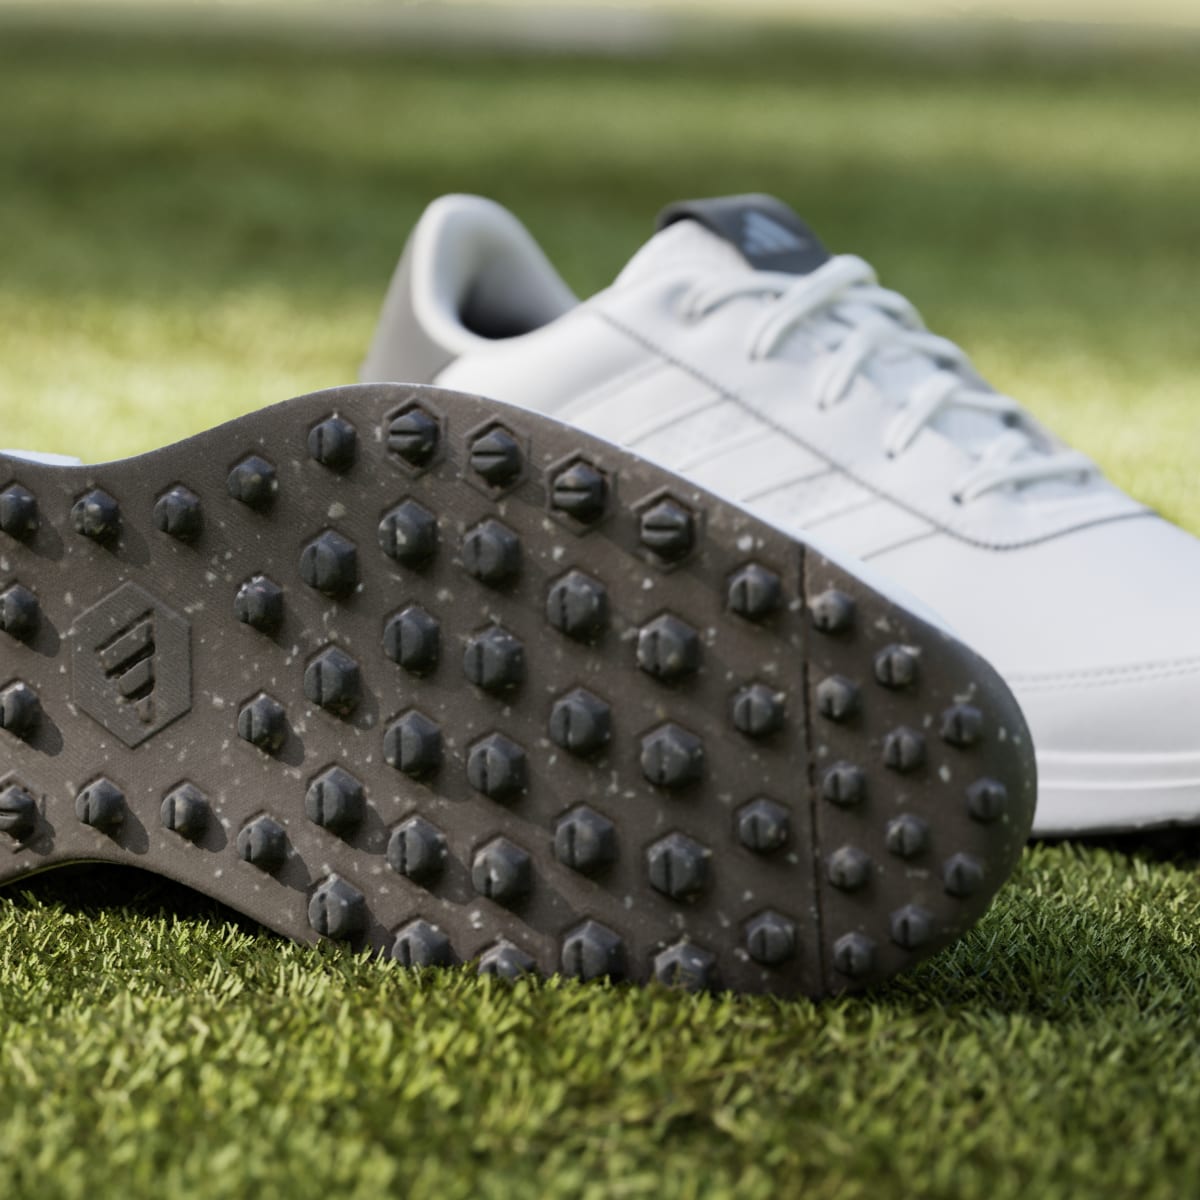 Adidas S2G Spikeless Leather 24 Golf Shoes. 8